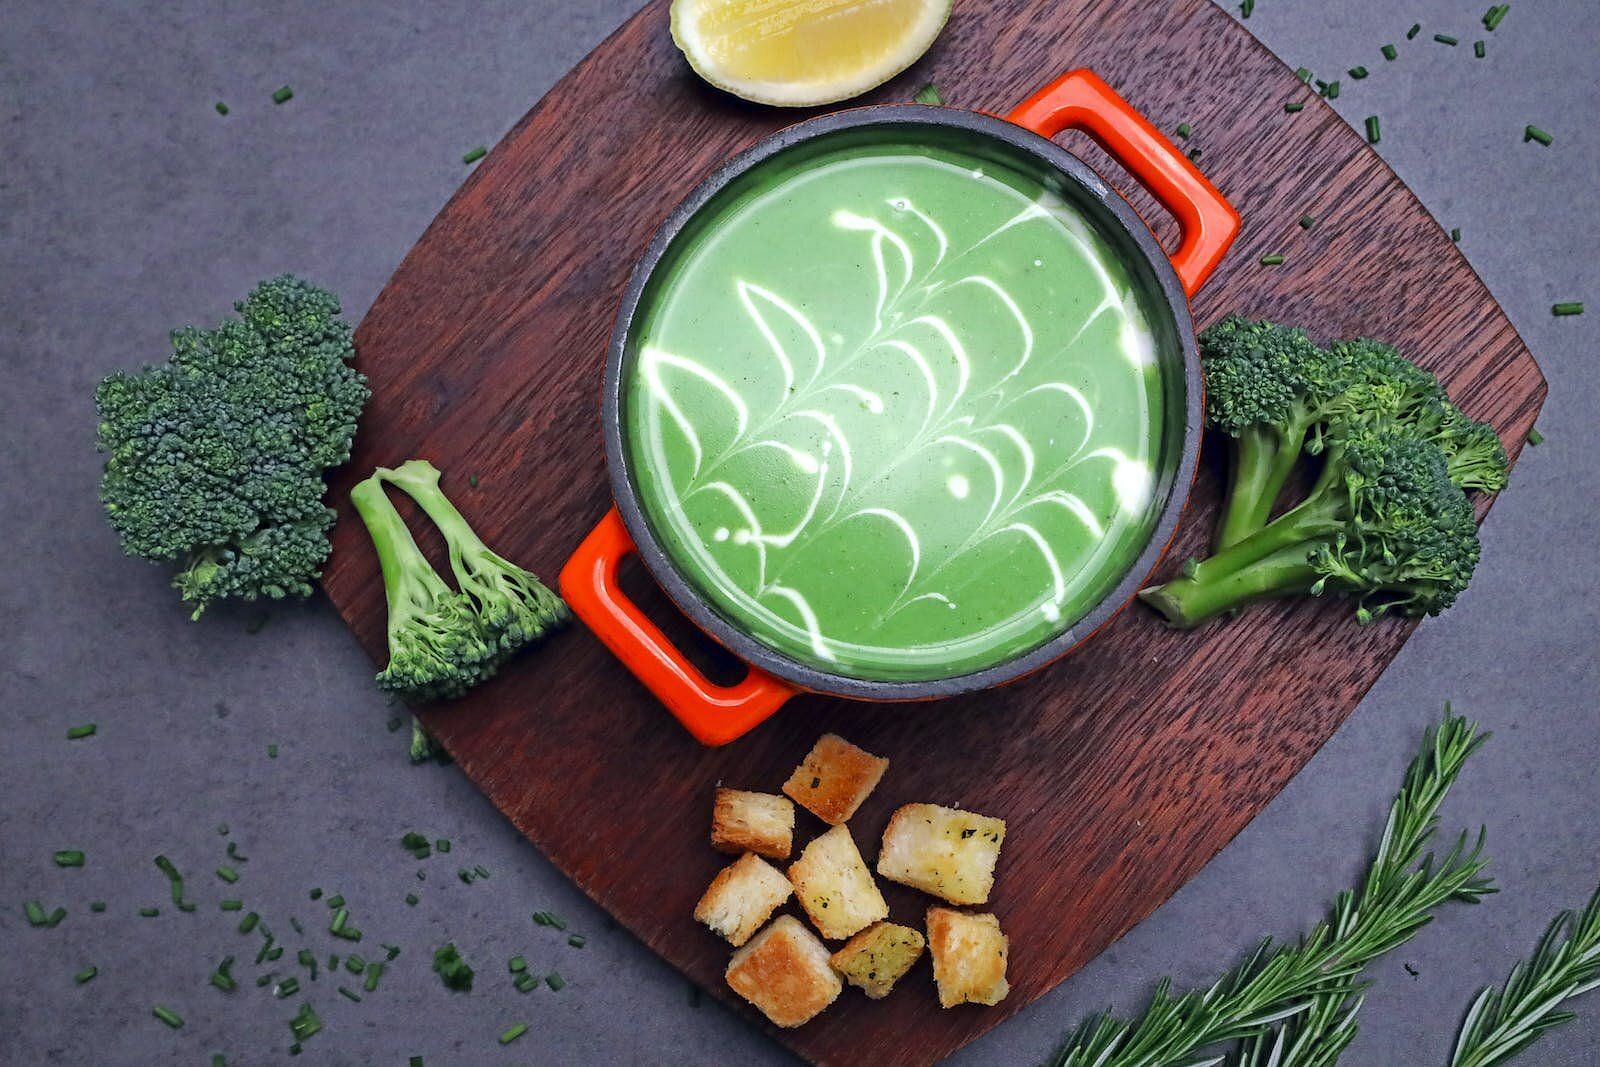 Fresh broccoli and cheddar soup (Image source: Pexels)